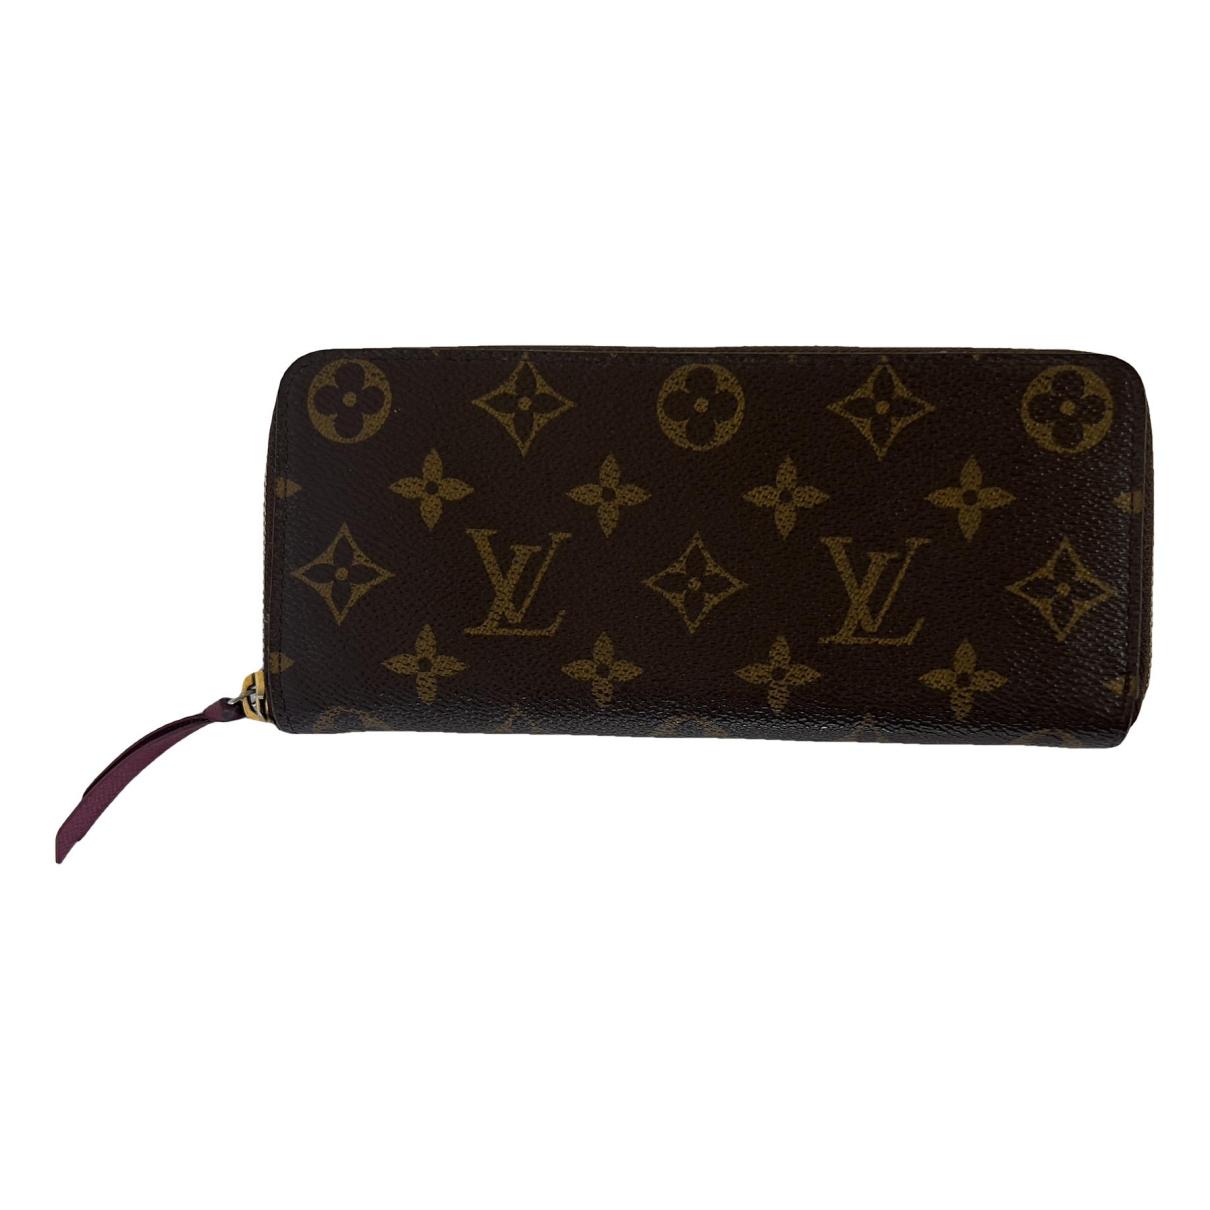 Louis Vuitton Wallets for sale in Newbury, New Hampshire